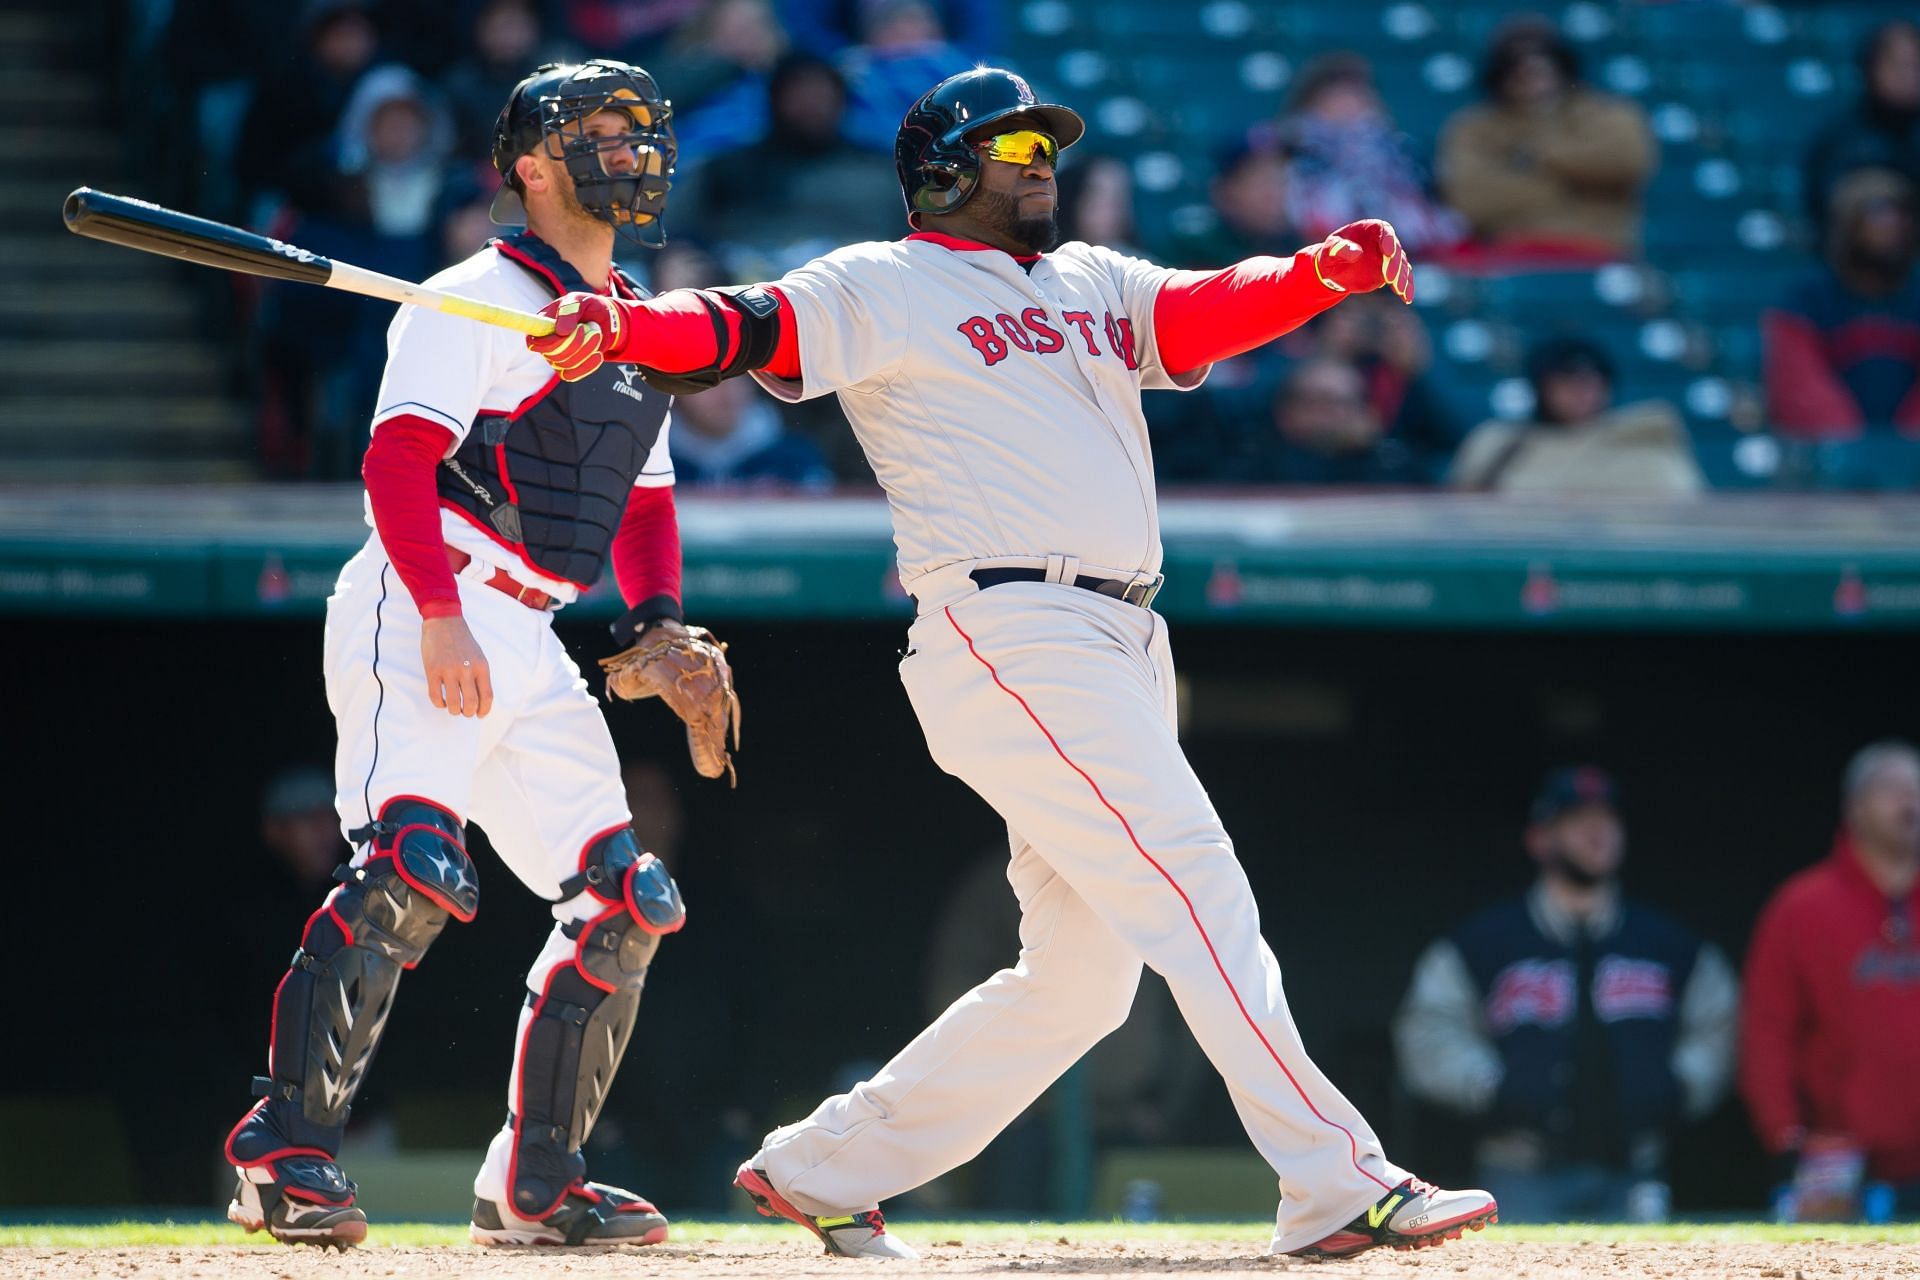 Boston Red Sox designated hitter David Ortiz has crushed the souls of New York Yankees fans for the majority of the 21st century